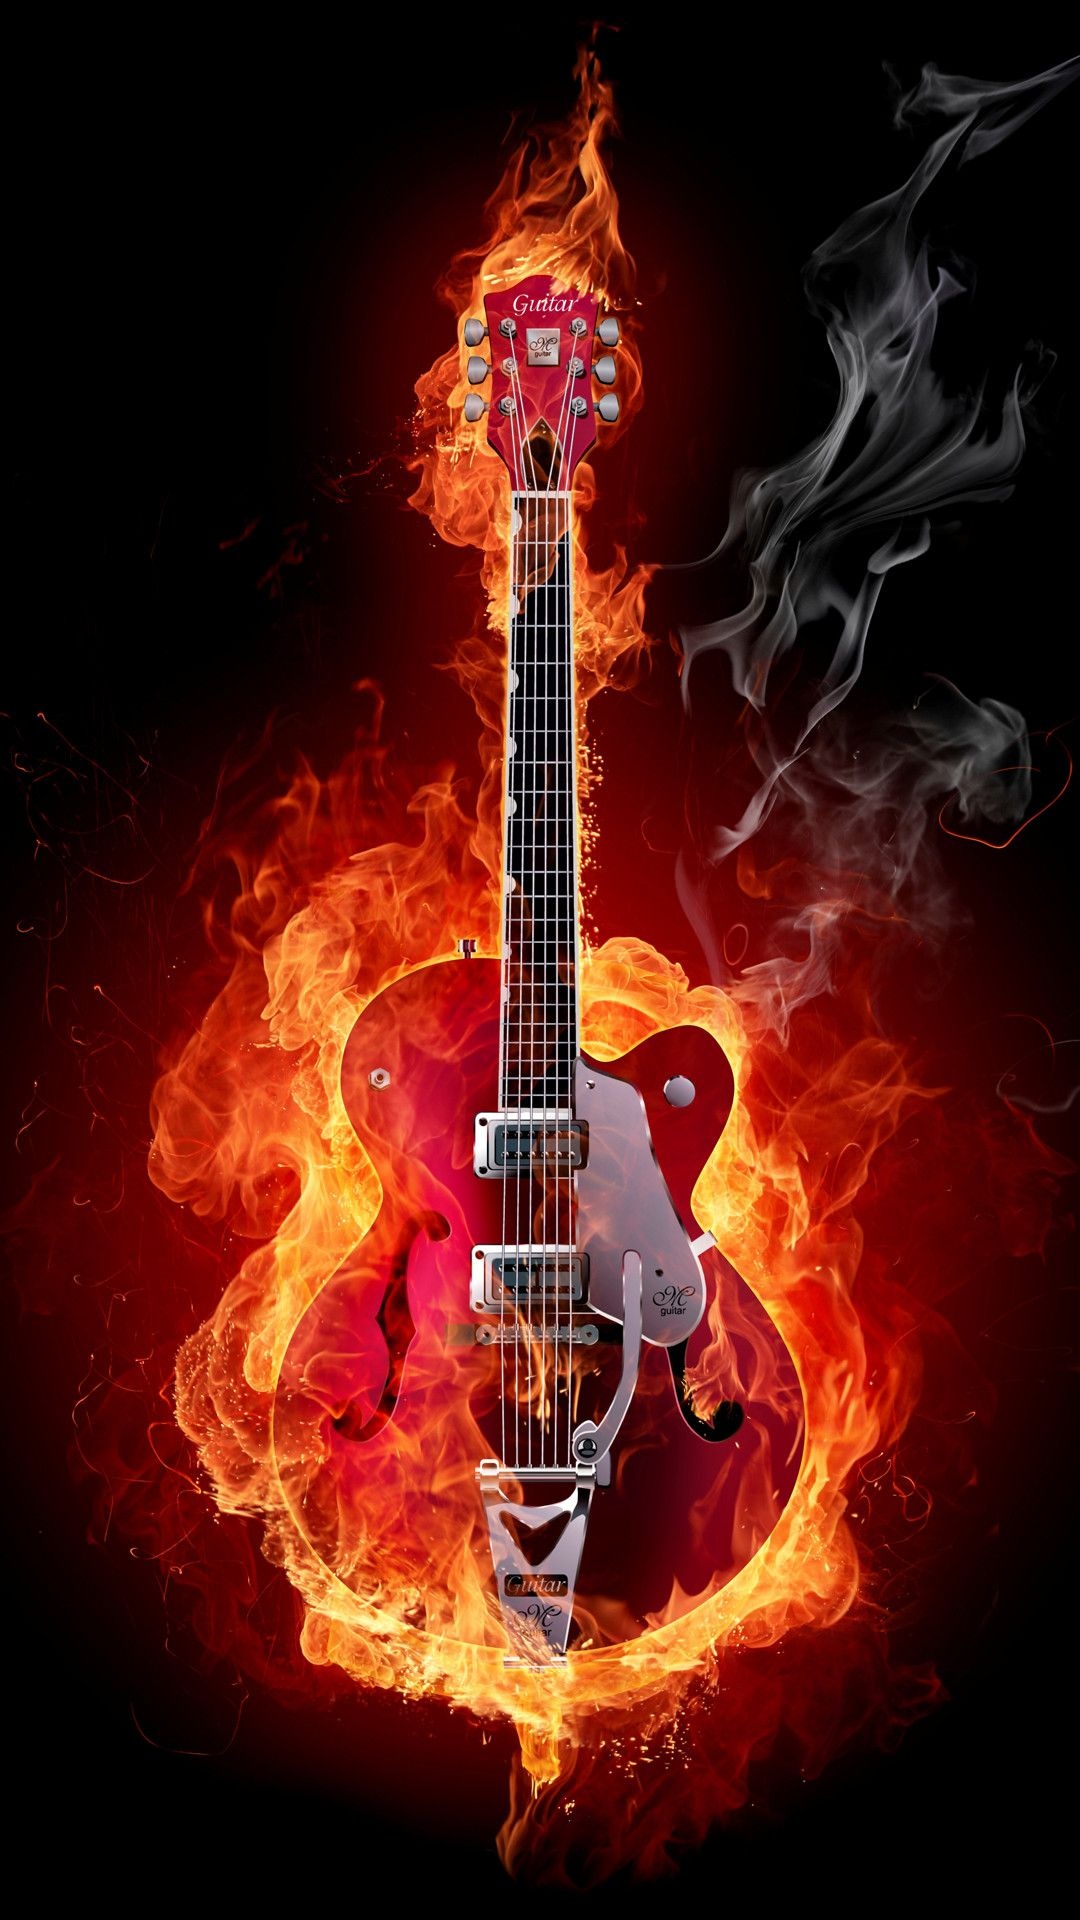 Guitar on fire, Blazing rock melodies, Fiery passion, Musical combustion, 1080x1920 Full HD Phone